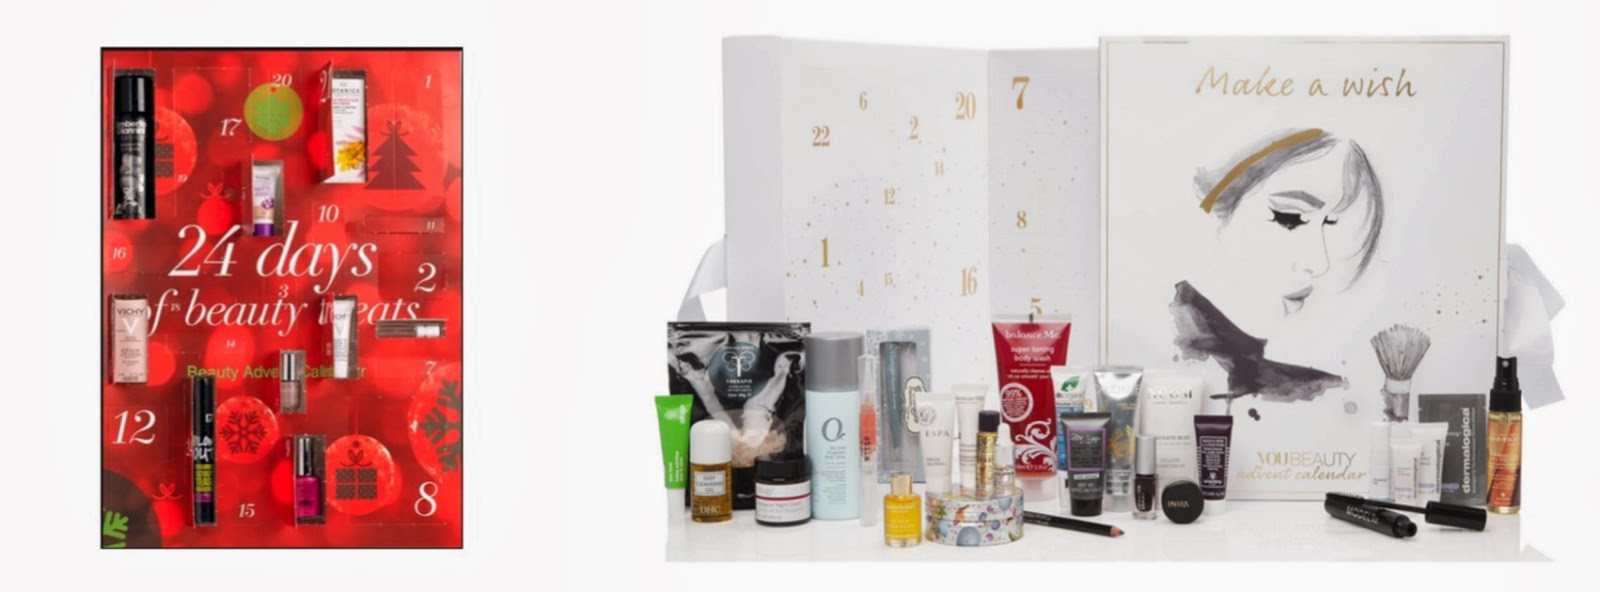 November 2013 | Barely There Beauty - A Lifestyle Blog  Chanel Advent Calendar Ebay